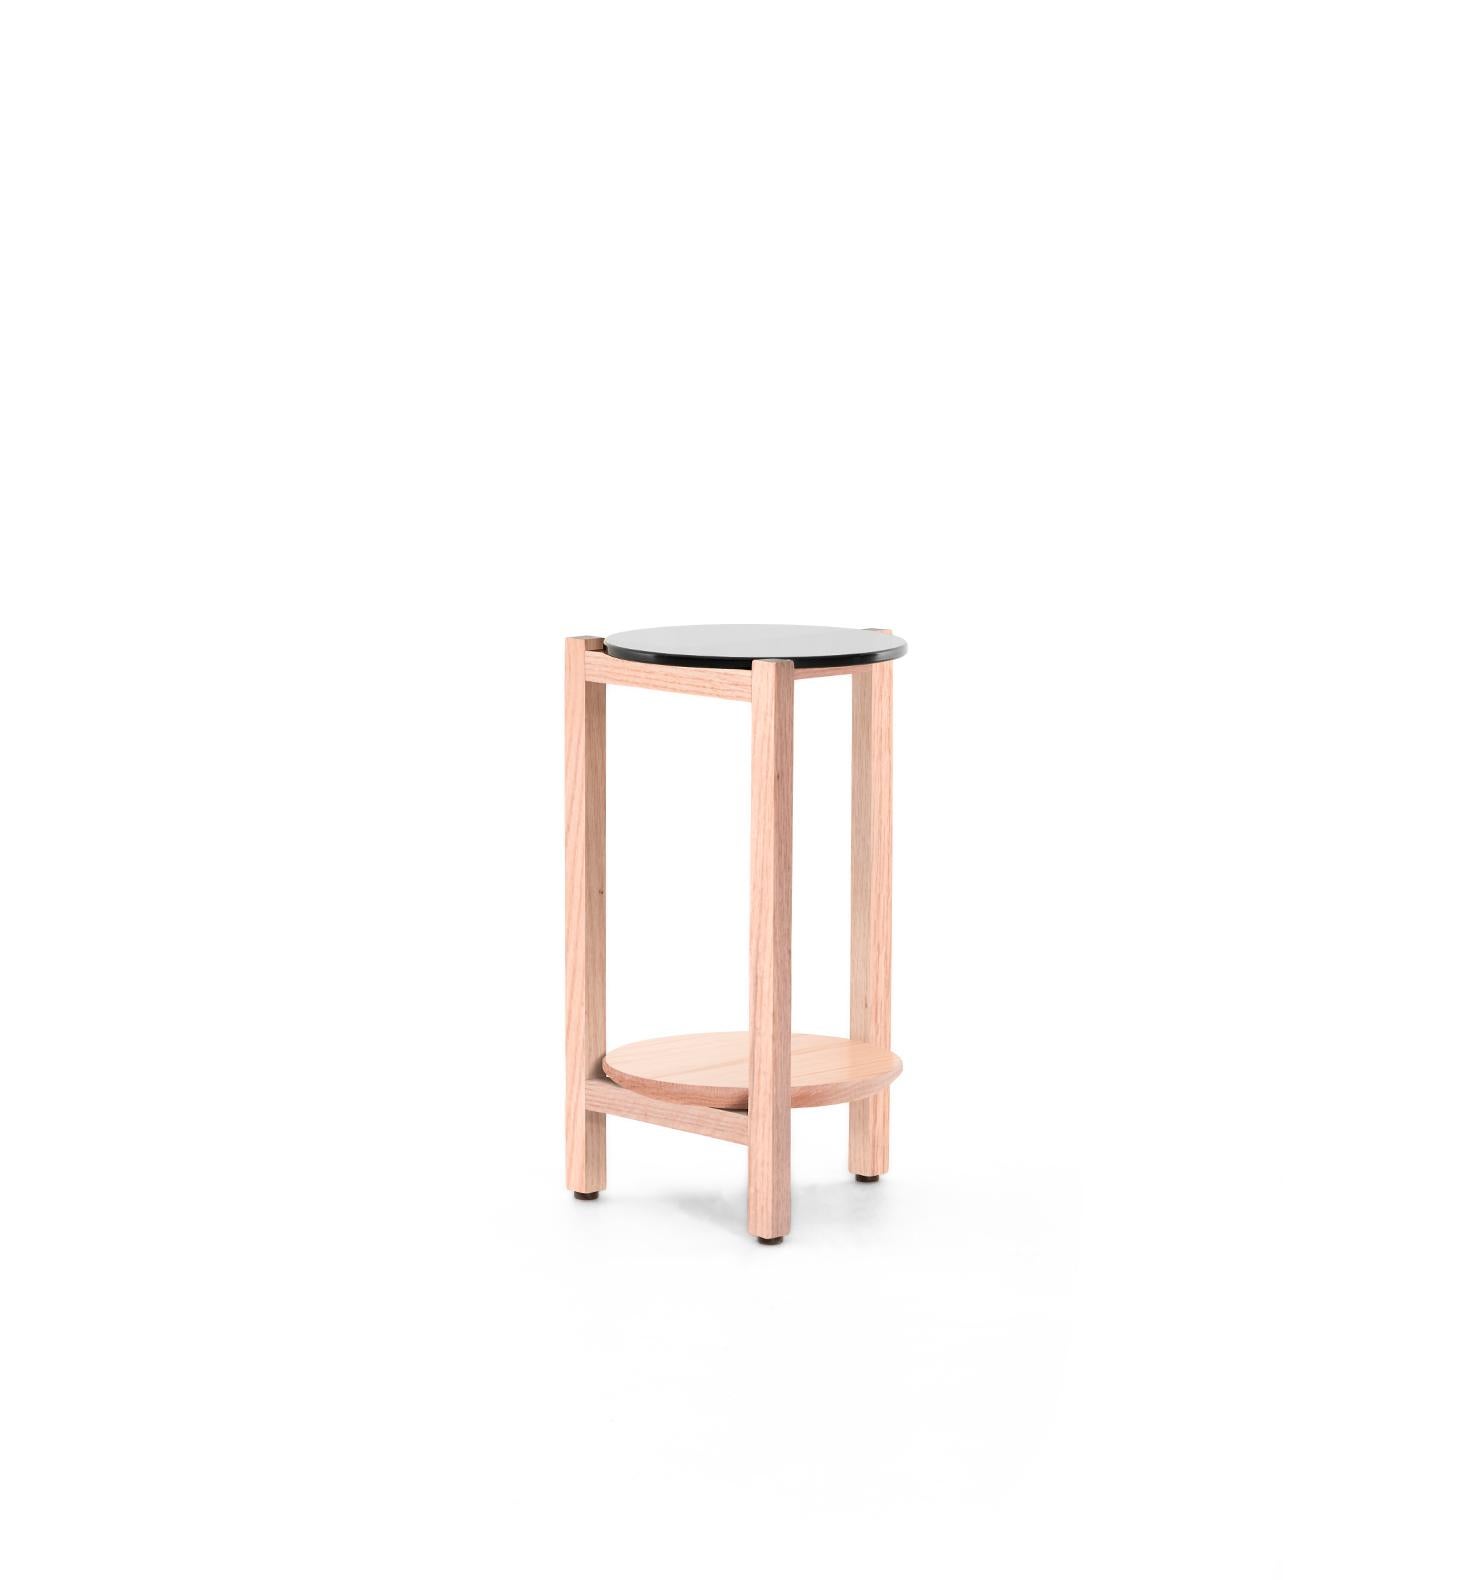 Introducing the Dedo C, Mexican contemporary side table designed by Emiliano Molina for CUCHARA. These tables are part of our DEDO Side Table collection, where beauty lies in their usefulness. As practical as they are simple, each table integrates a